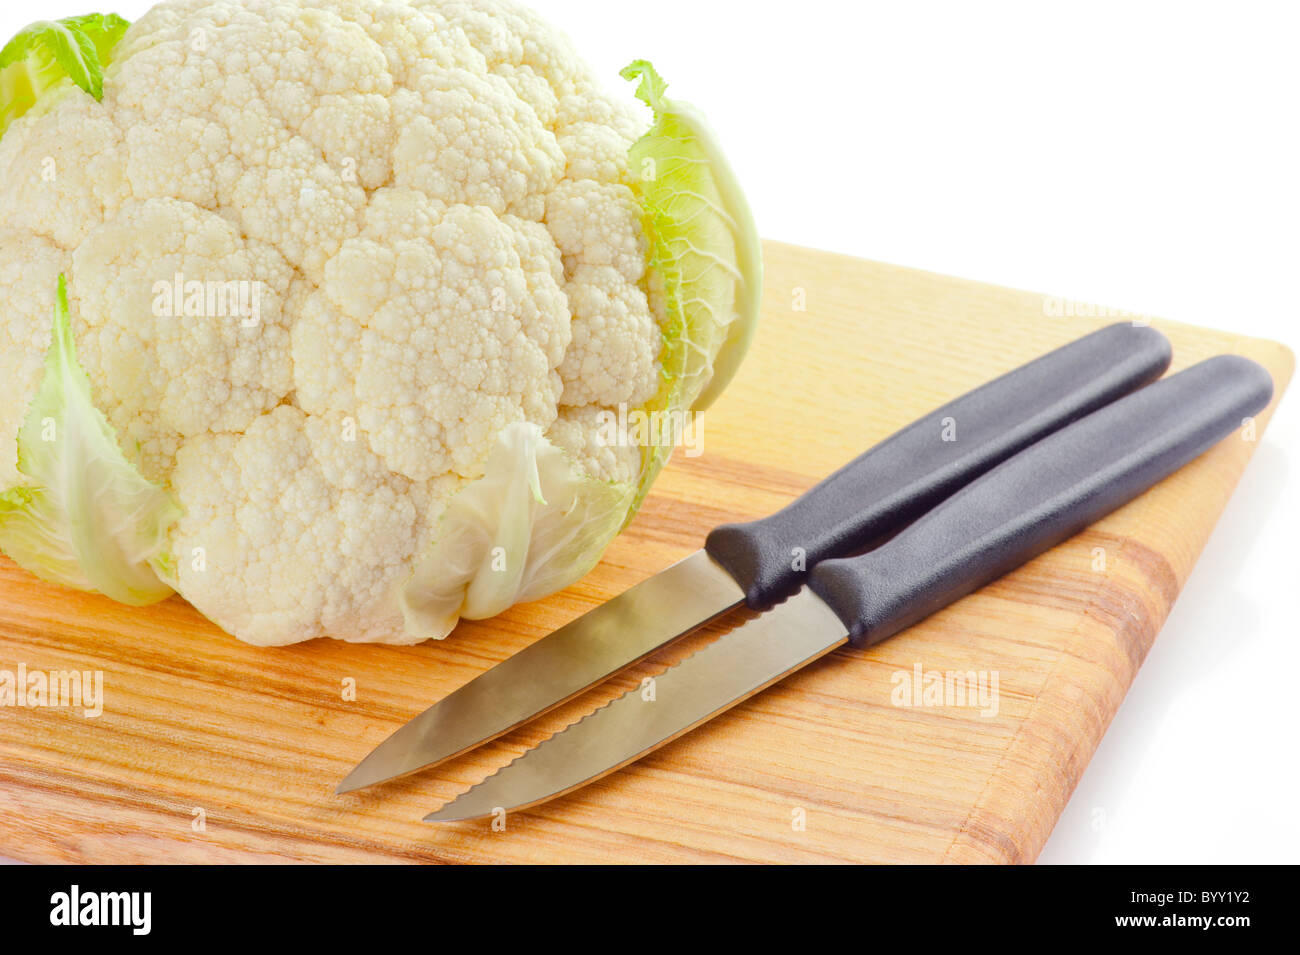 Cauliflower cabbage on wooden cutting board isolated on white background Stock Photo